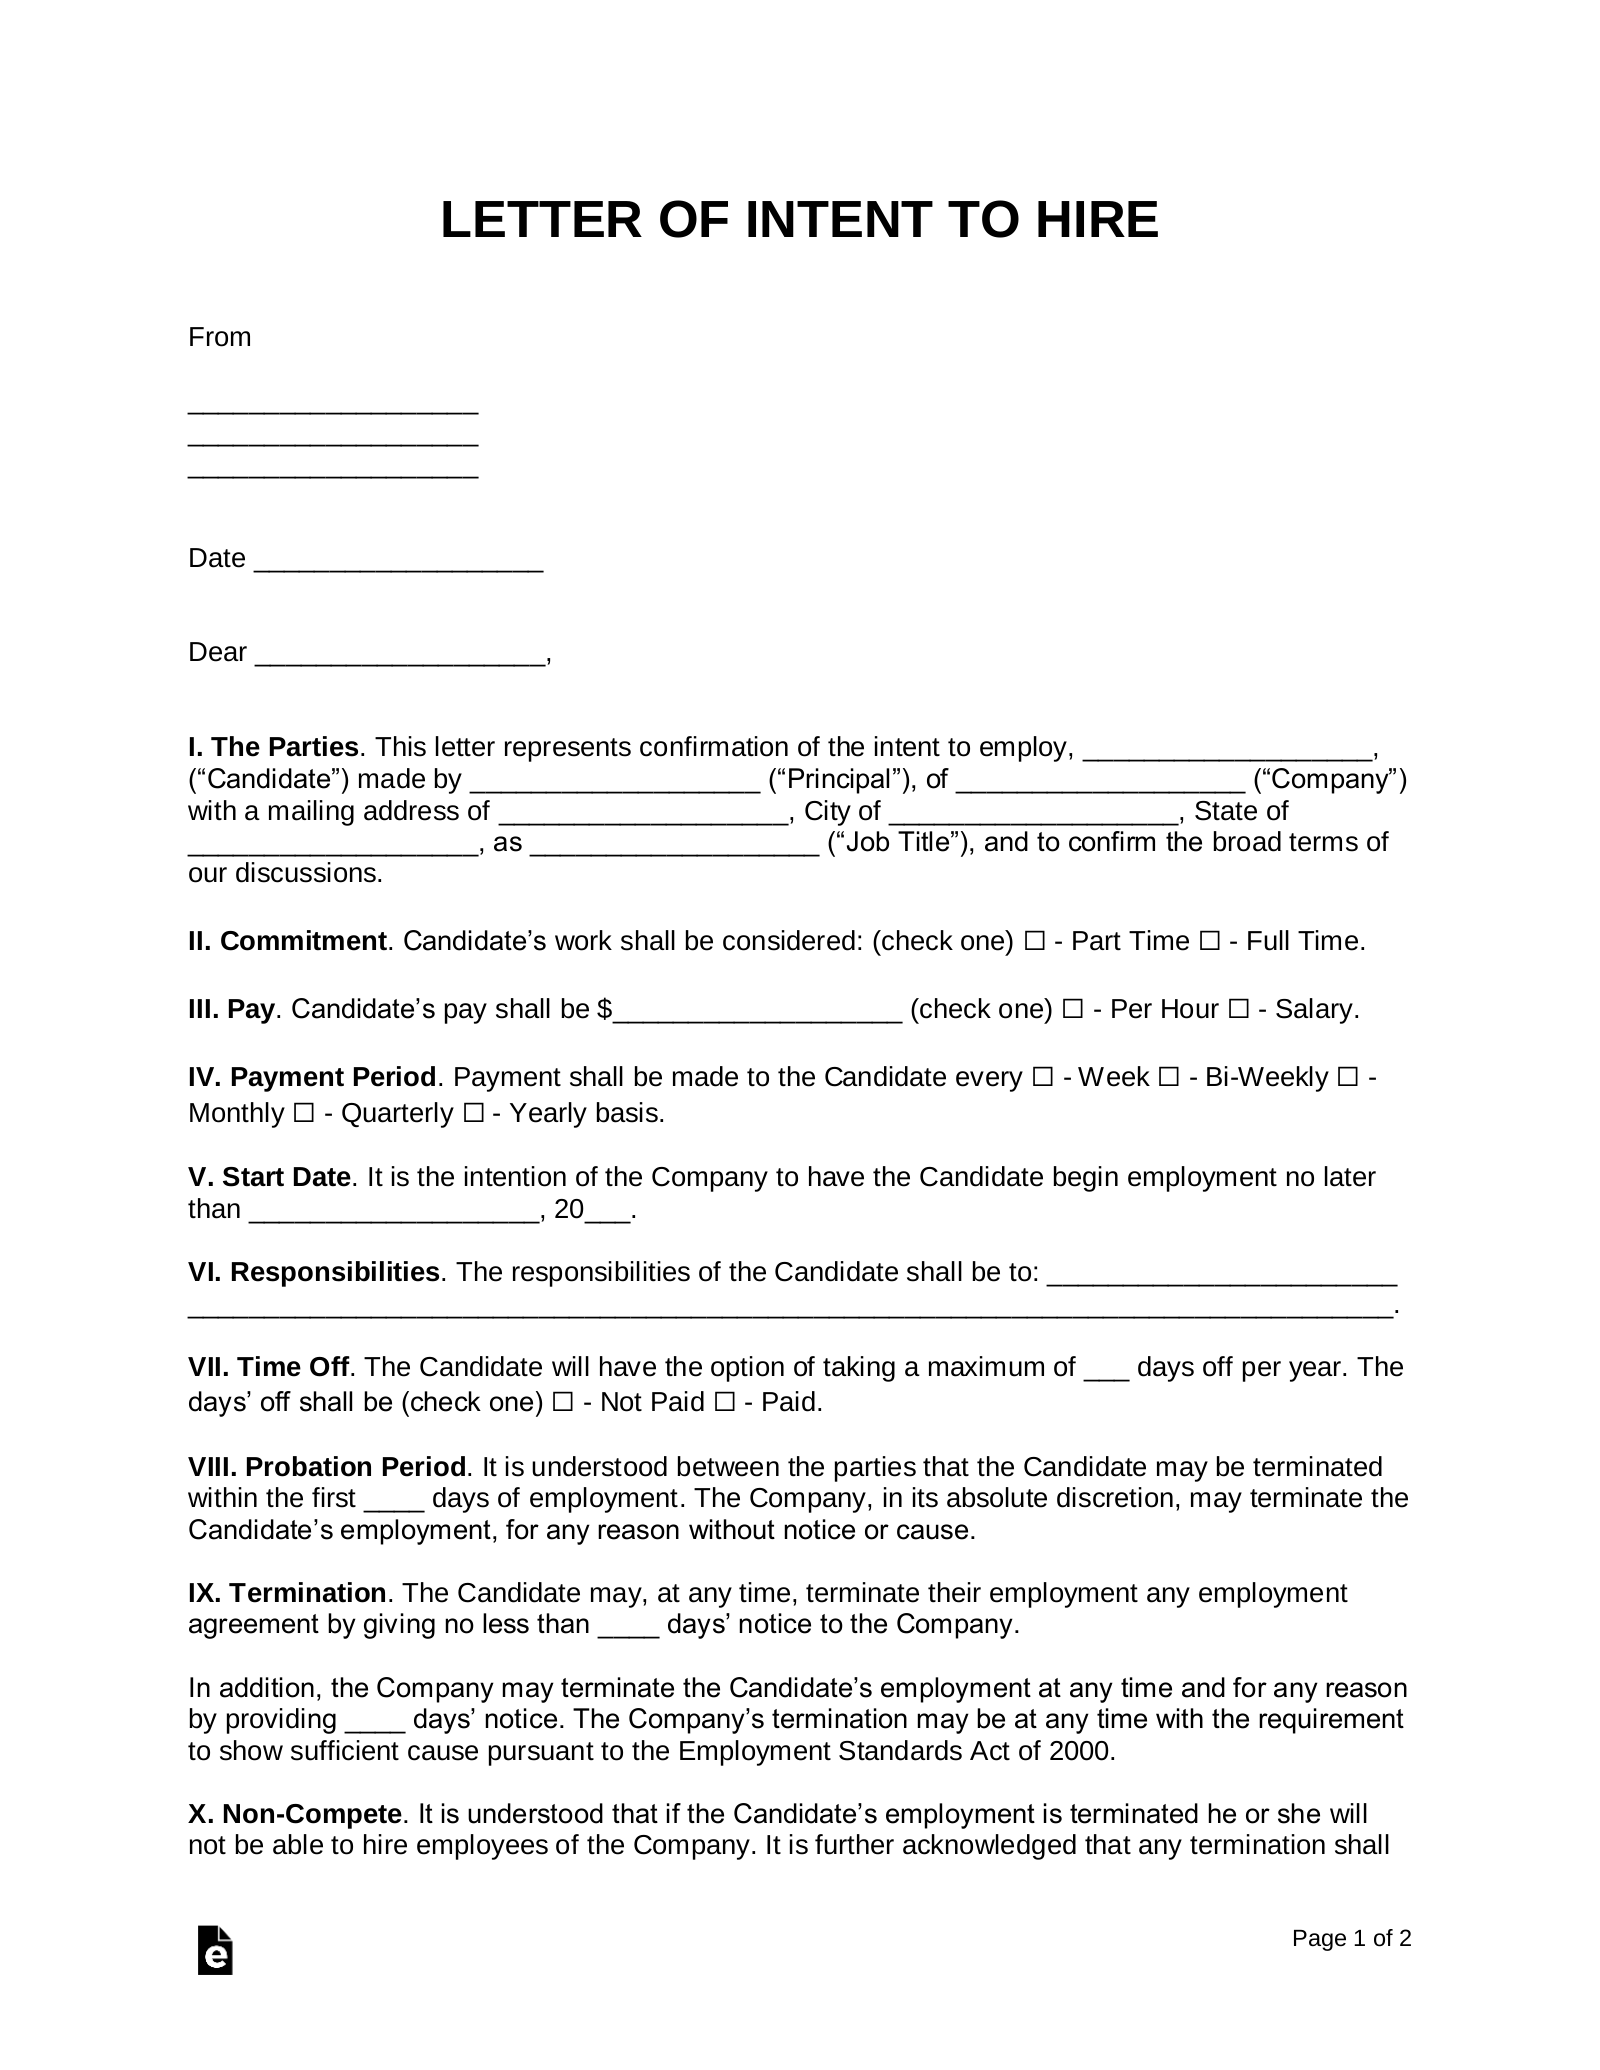 Letter Of Intent For Consulting Services from eforms.com